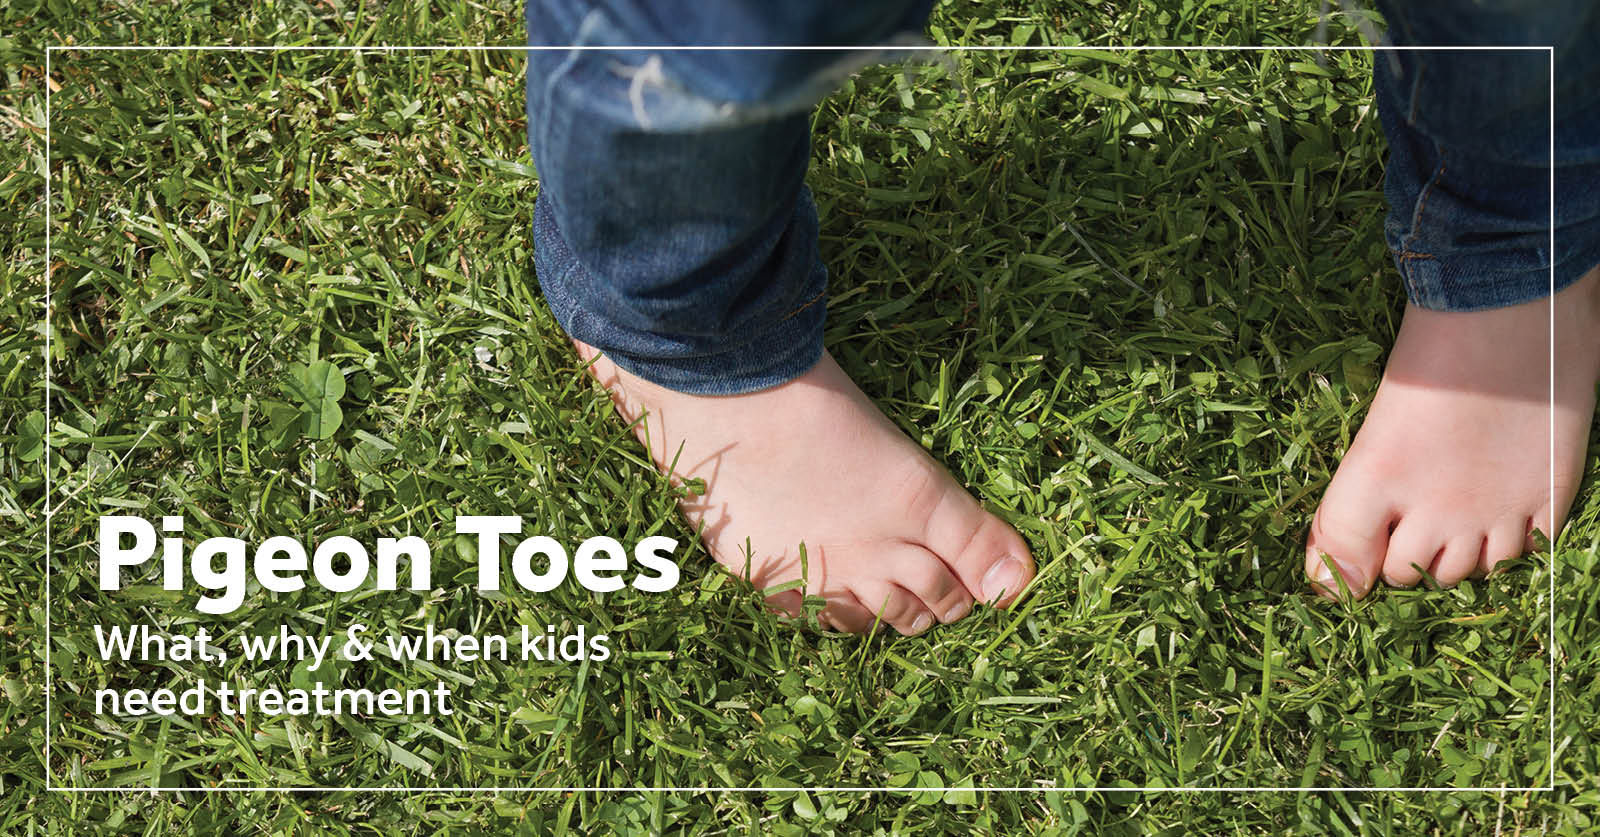 Pigeon Toes – What, Why & When Kids Need Treatment